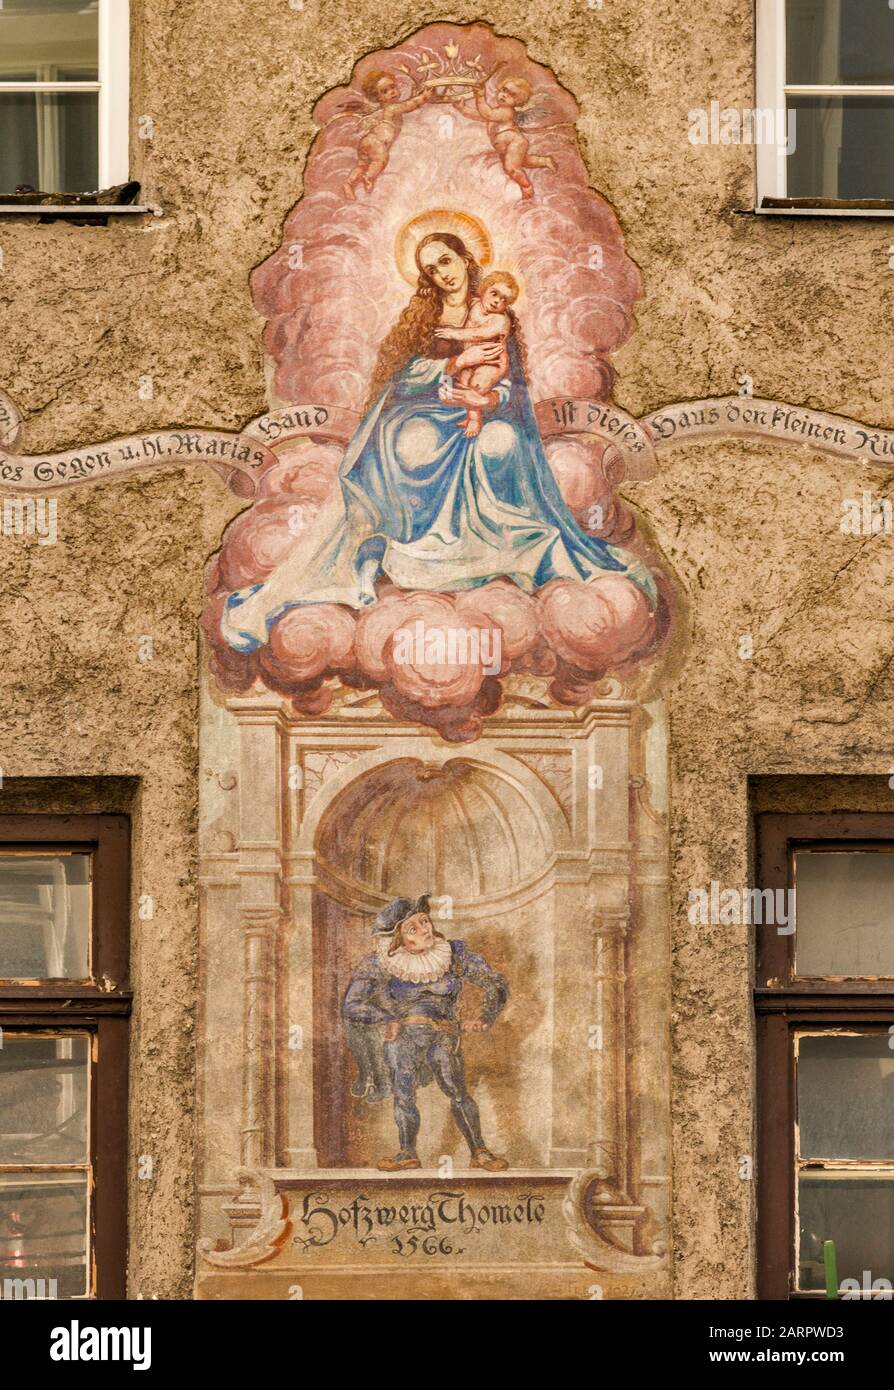 Virgin Mary with Jesus and court dwarf Thomele mural, dated 1566, on building at Stiftgasse, Old Town in Innsbruck, Tyrol, Austria Stock Photo